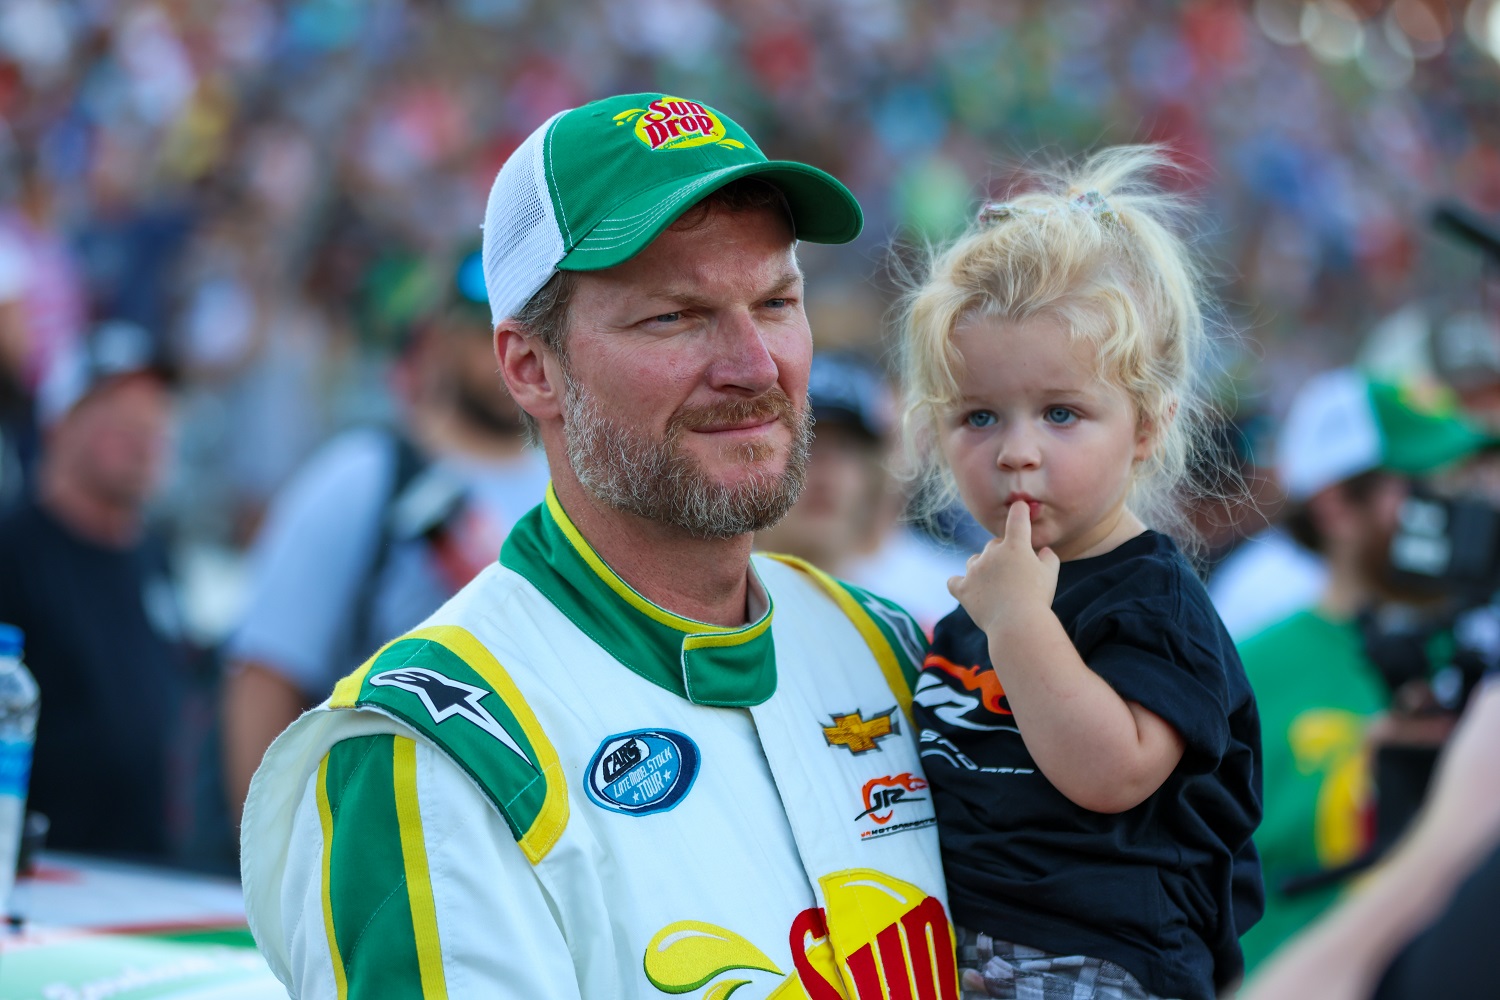 Dale Earnhardt Jr. Takes the Inevitable Step to Expand His Empire